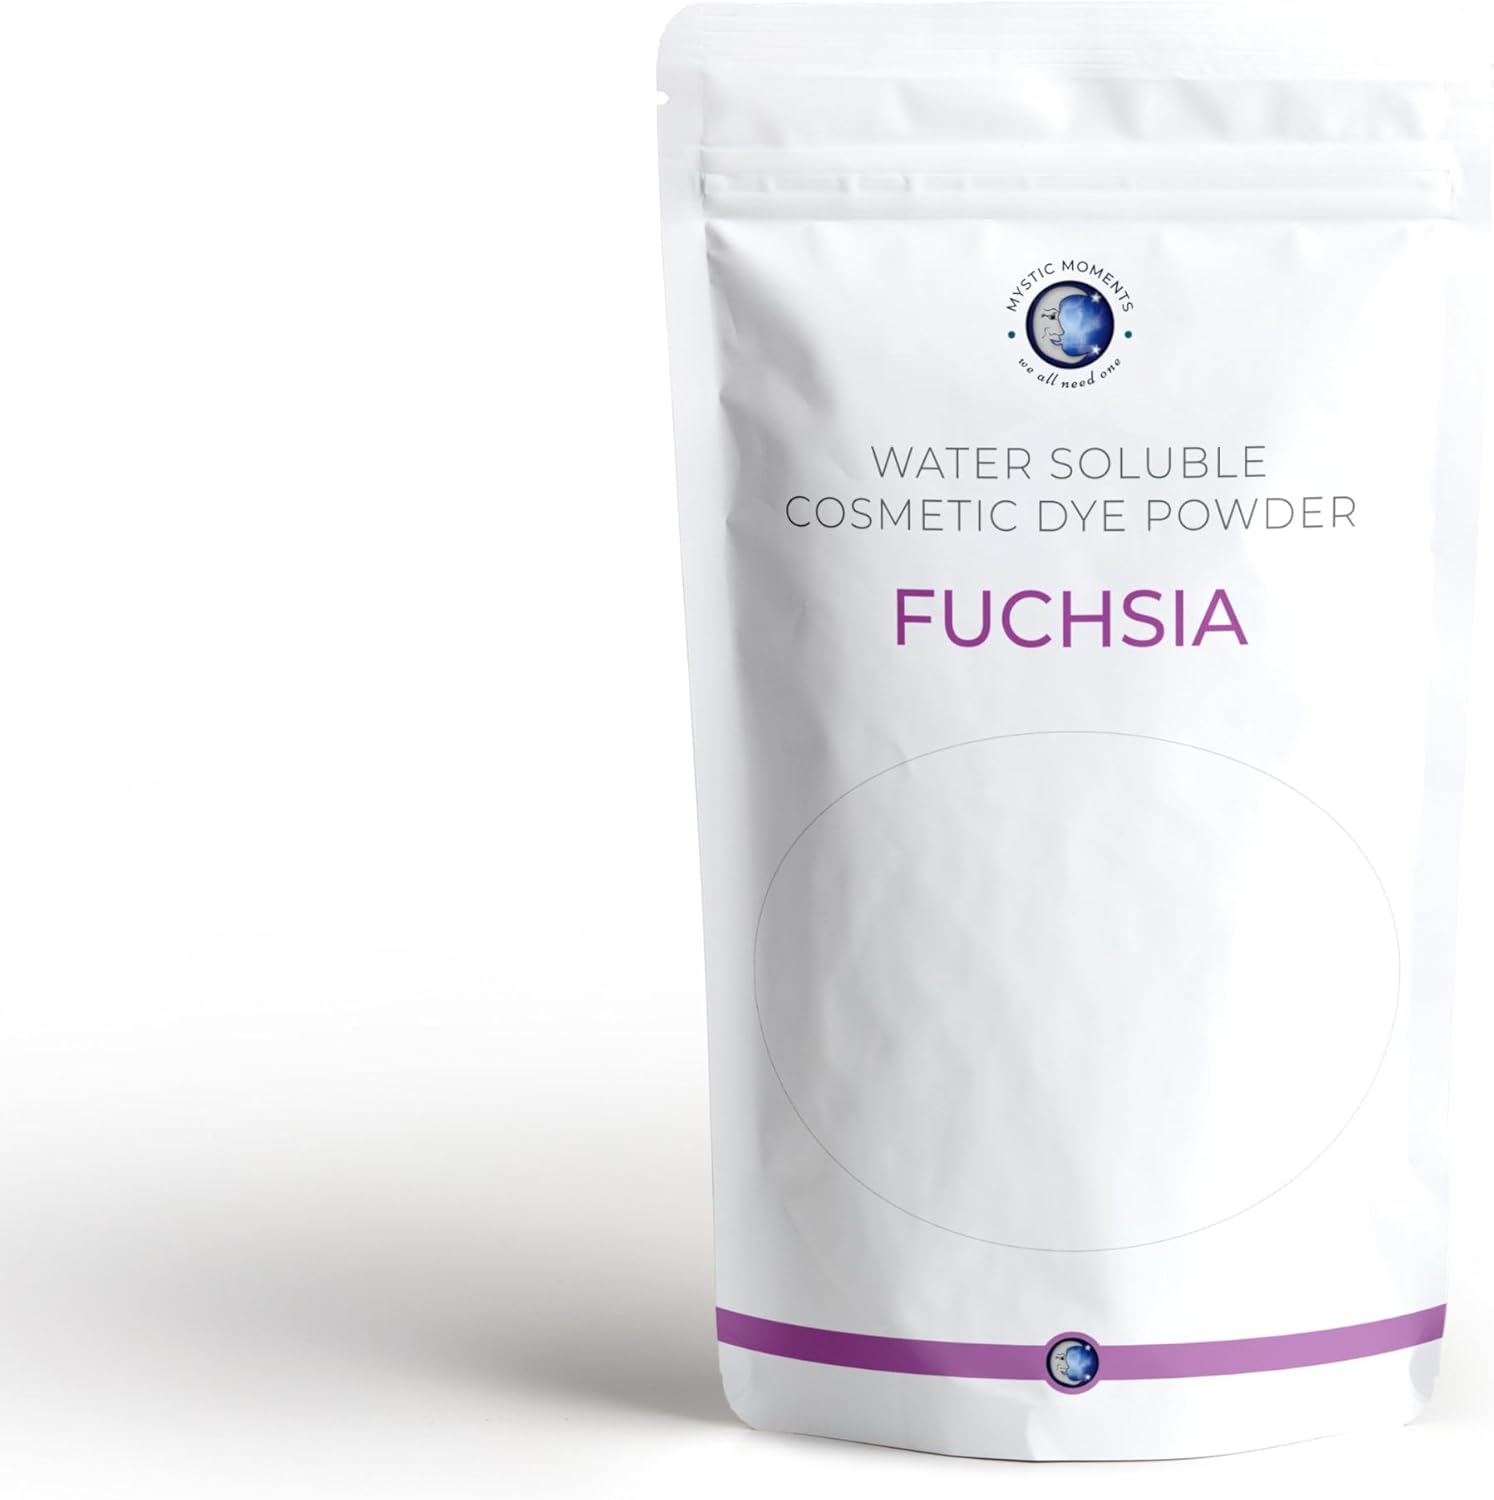 Mystic Moments | Fuchsia Water-Soluble Cosmetic Dye Powder 100g | Perfect for Soap Making, Creams, Make Ups, Shampoos and Lotions : Amazon.co.uk: Home & Kitchen